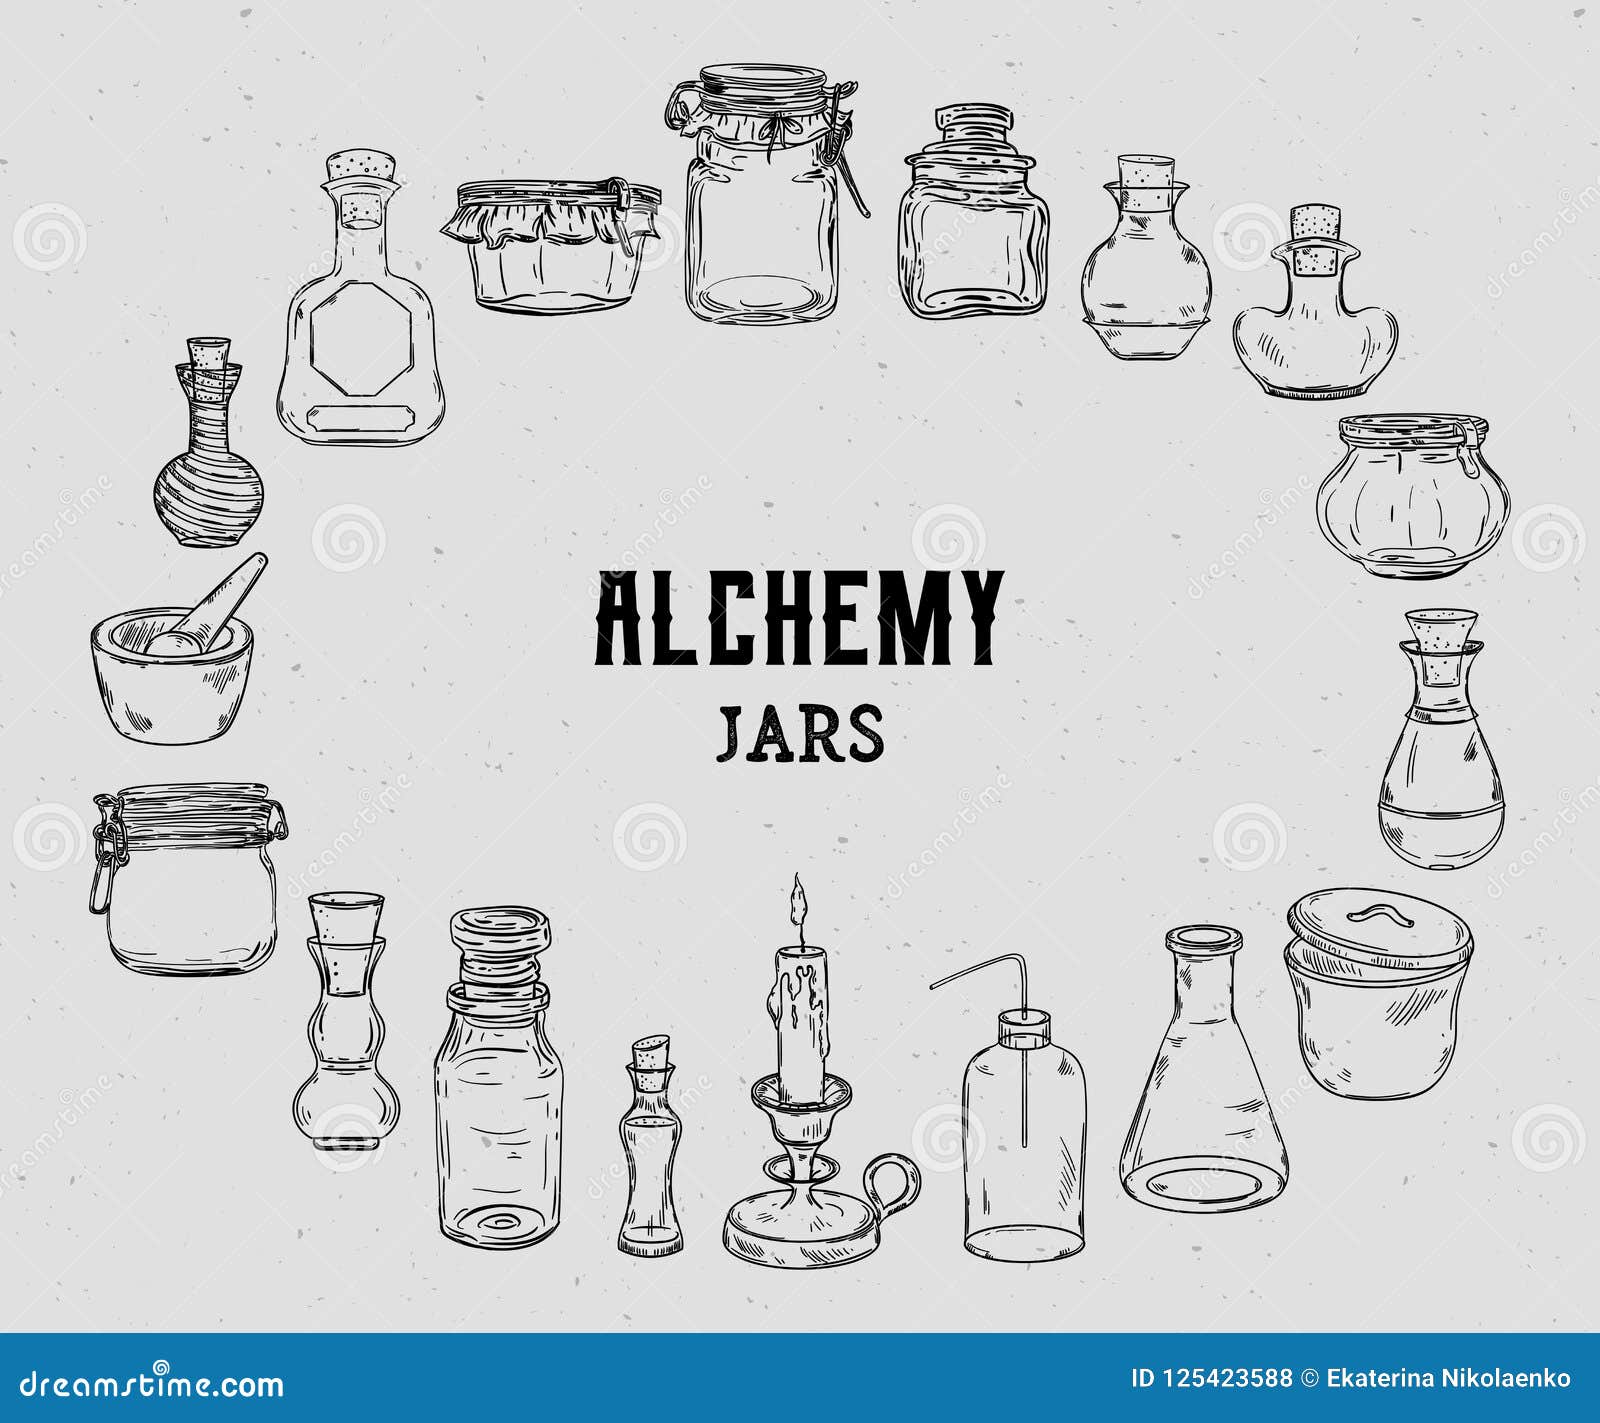 empty alchemy jars for potions collection. magic bottles for halloween decoration.